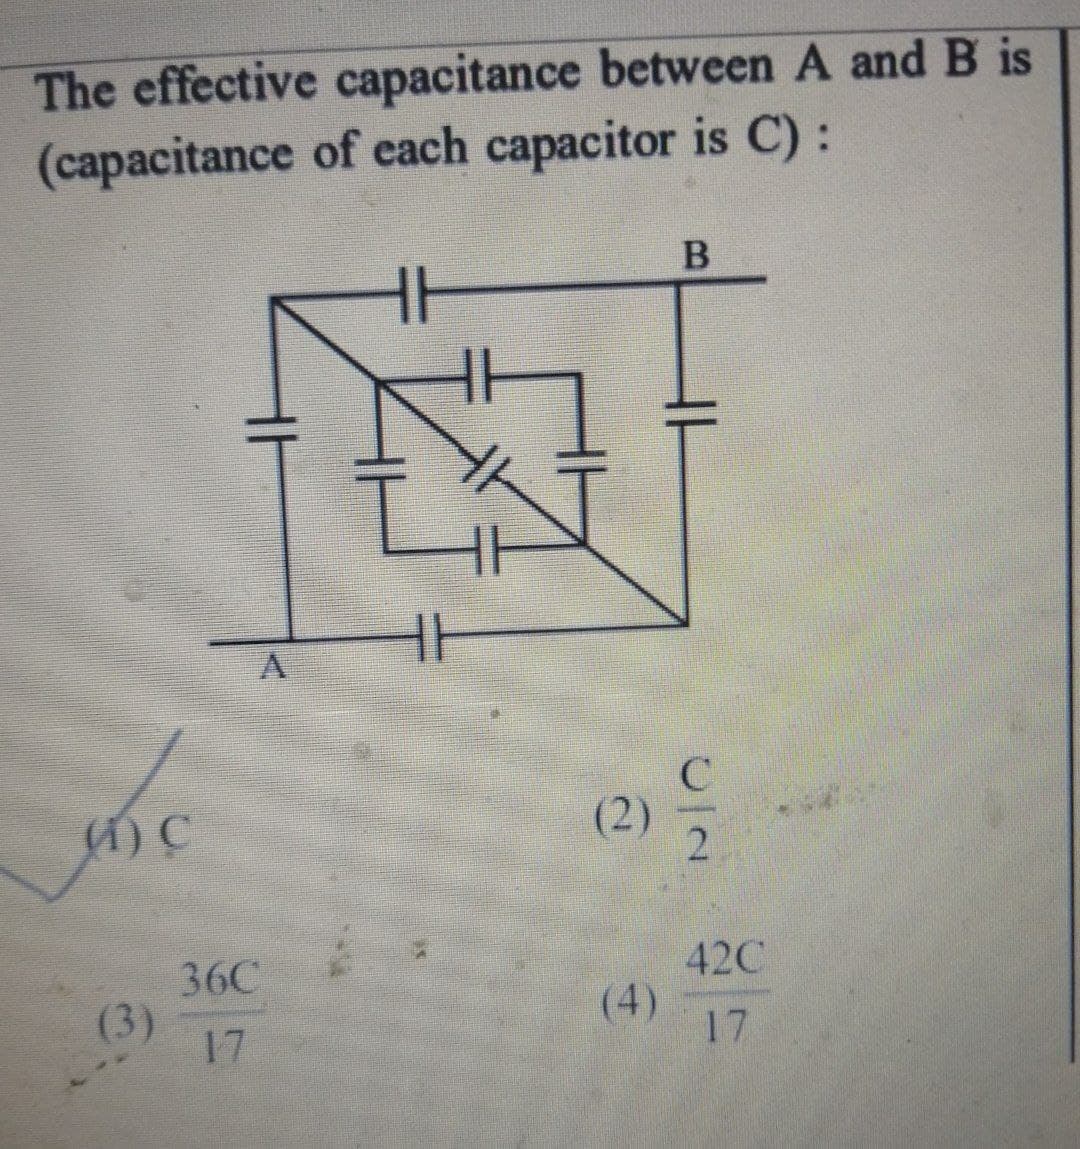 The effective capacitance between A and B is
(capacitance of each capacitor is C):
(2)
A) C
42C
36C
(3)
17
(4)
17
